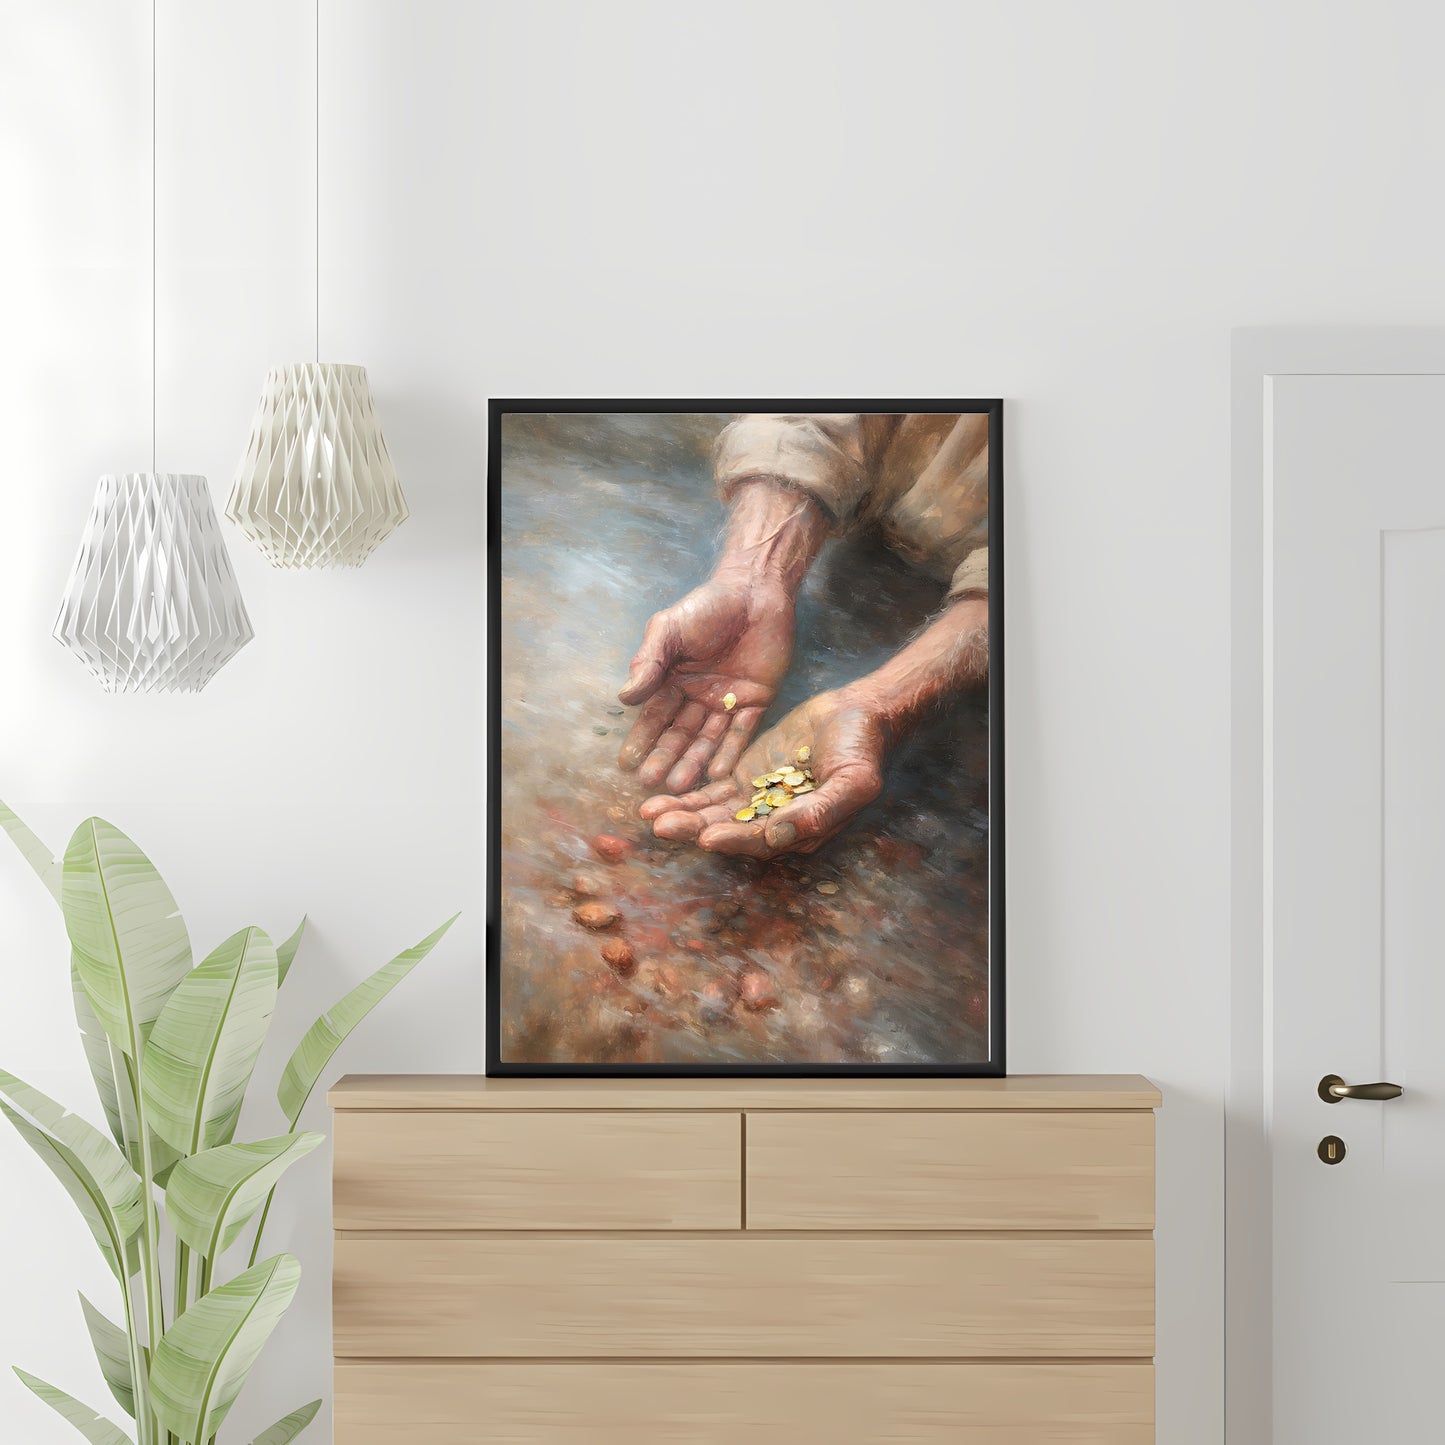 Vintage Gold Rush Paper Poster Prints Wall Art Old Man's Hands Holding Gold Over Dawson City River, Klondike, Pale Soft Colors